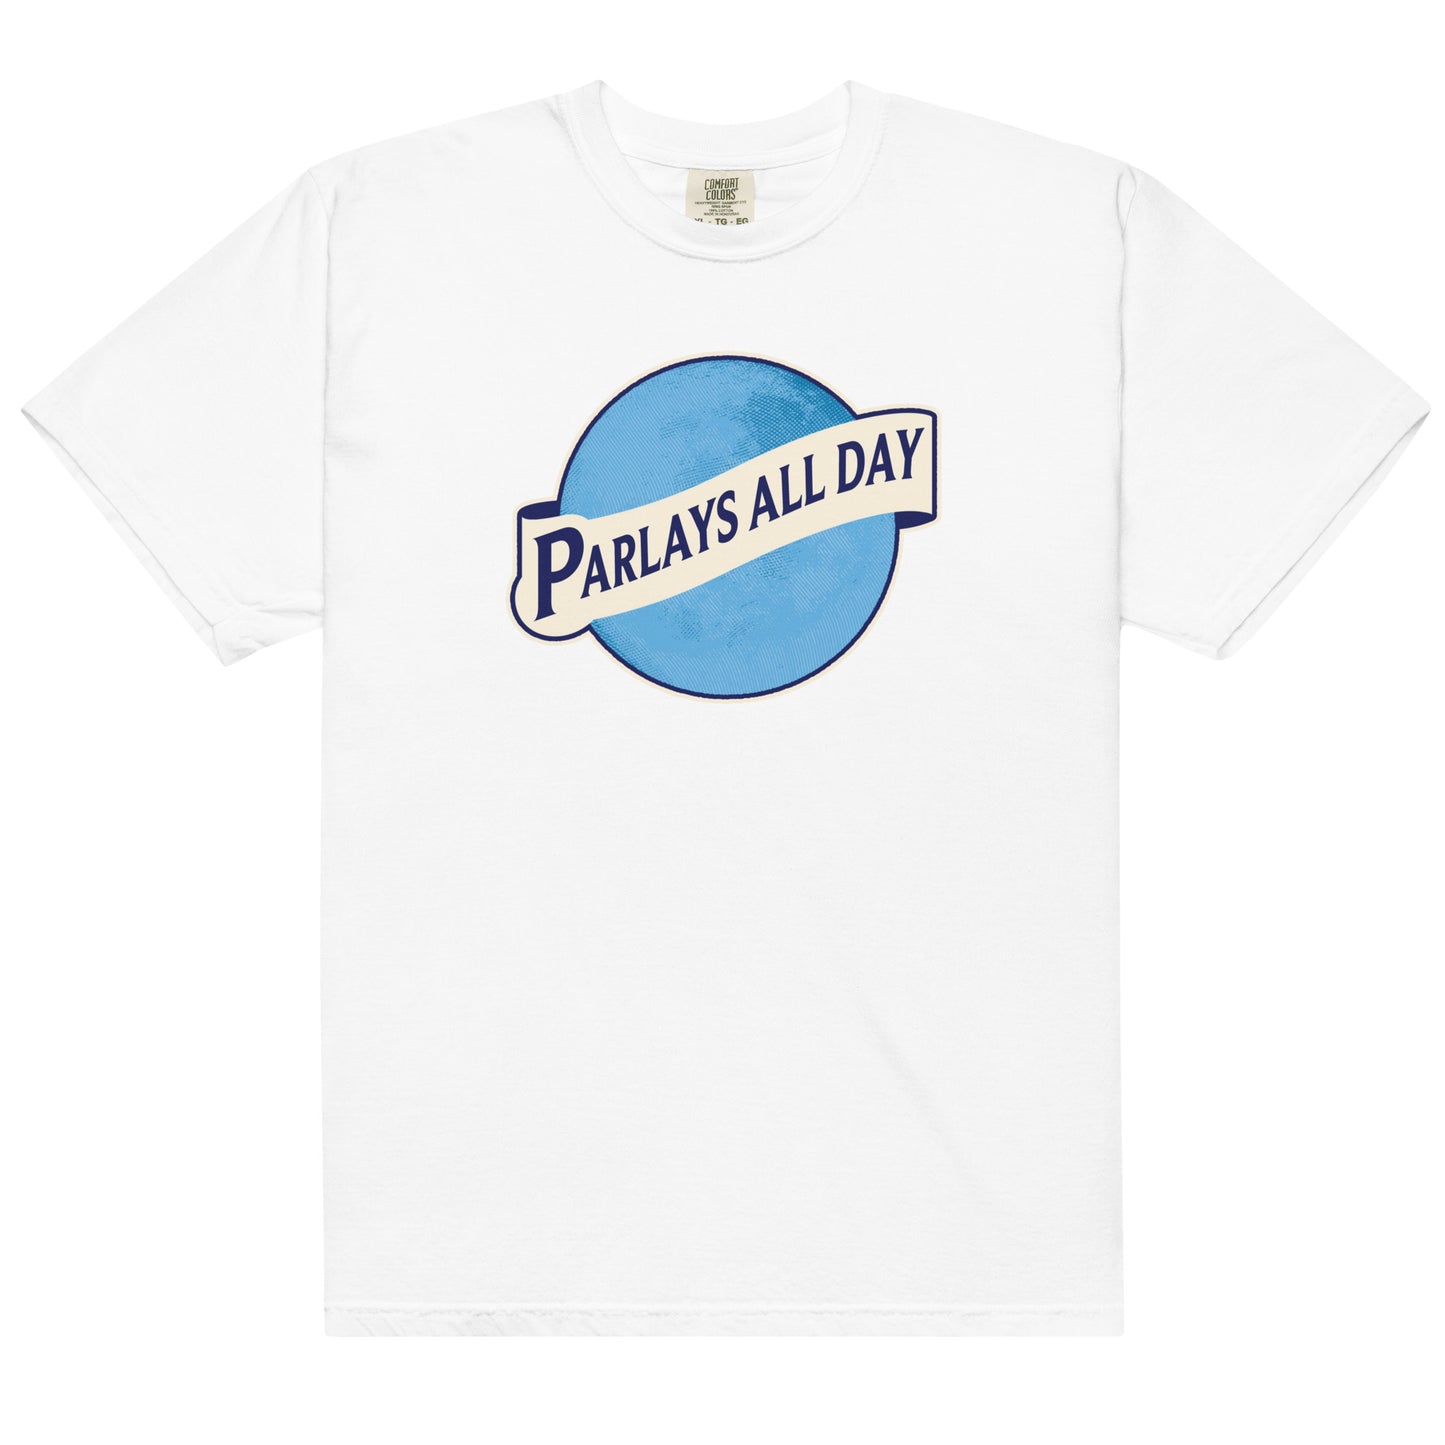 Parlays All Day Moon Tee